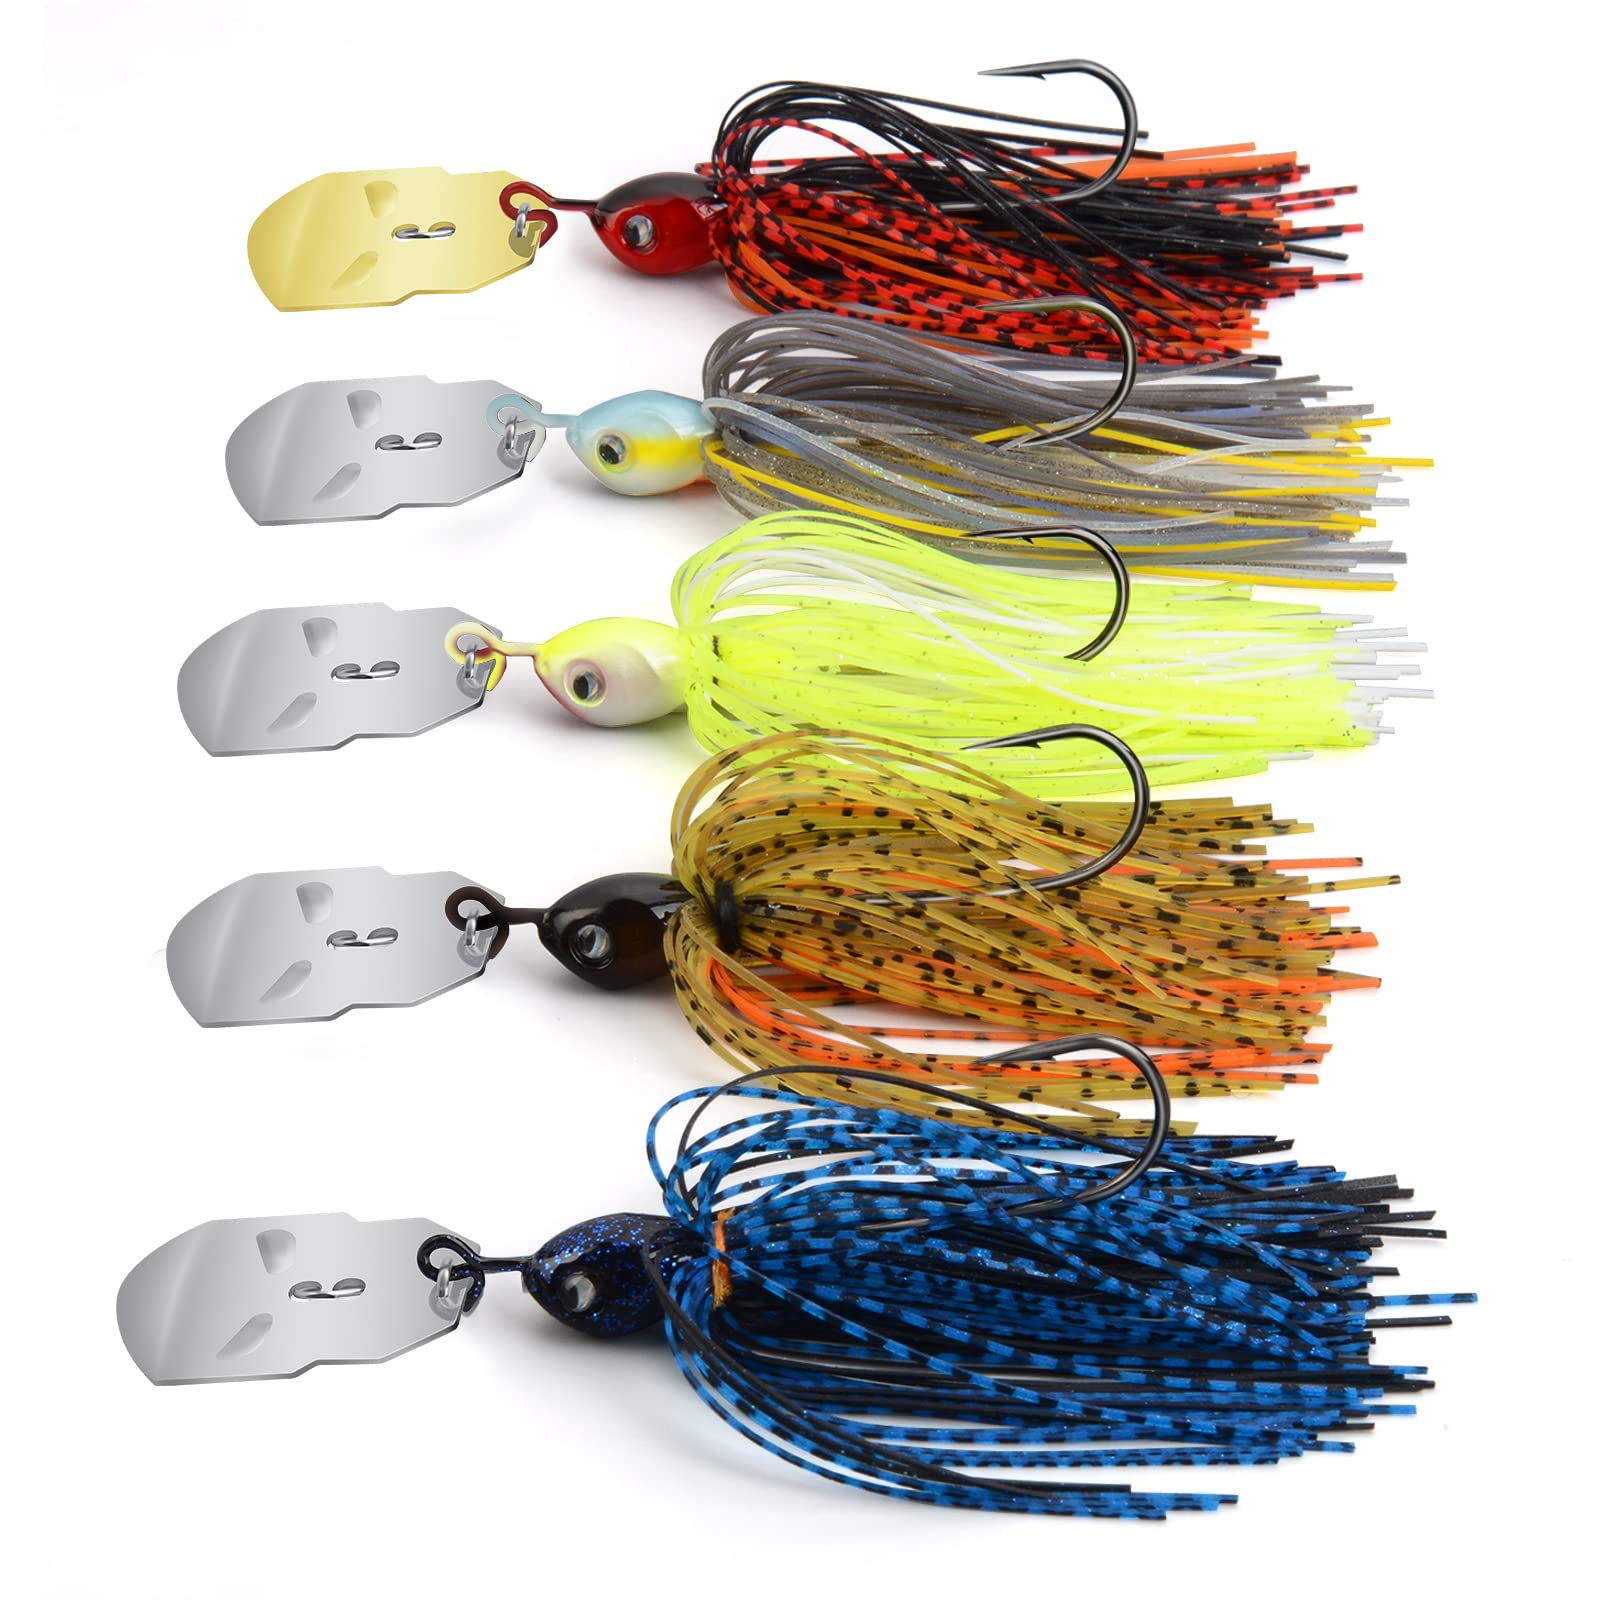 Jig Skirt Color. Are So Many Colors Necessary? - Fishing Tackle